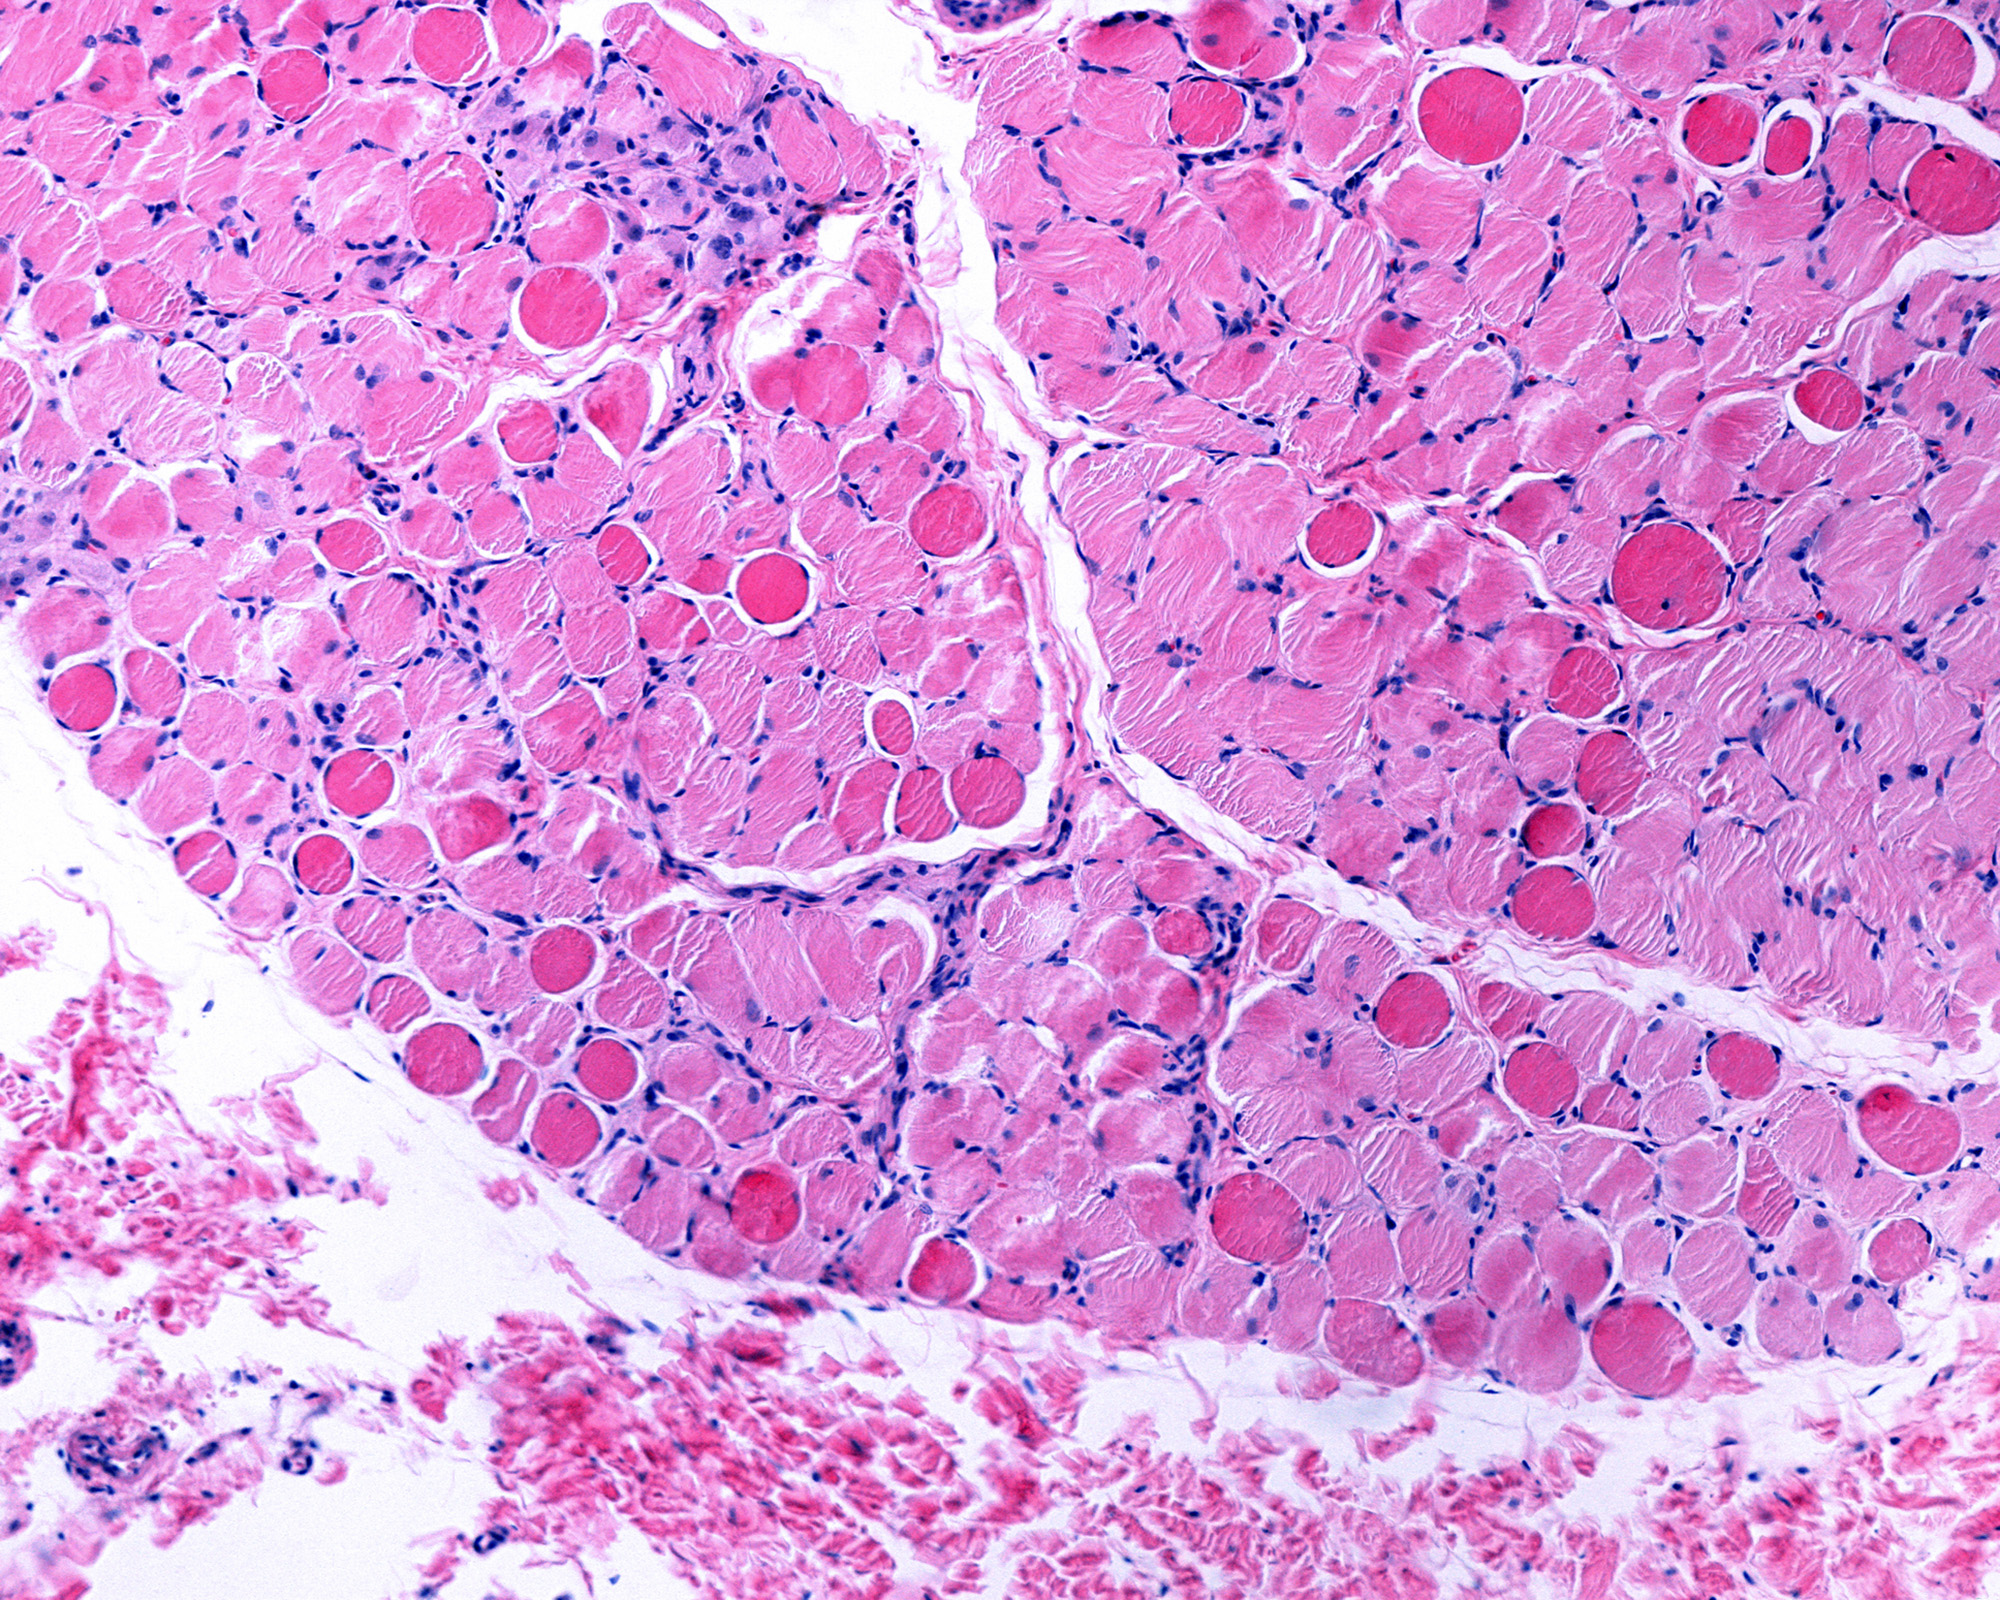 Necrotic muscle fiber Duchenne muscular dystrophy